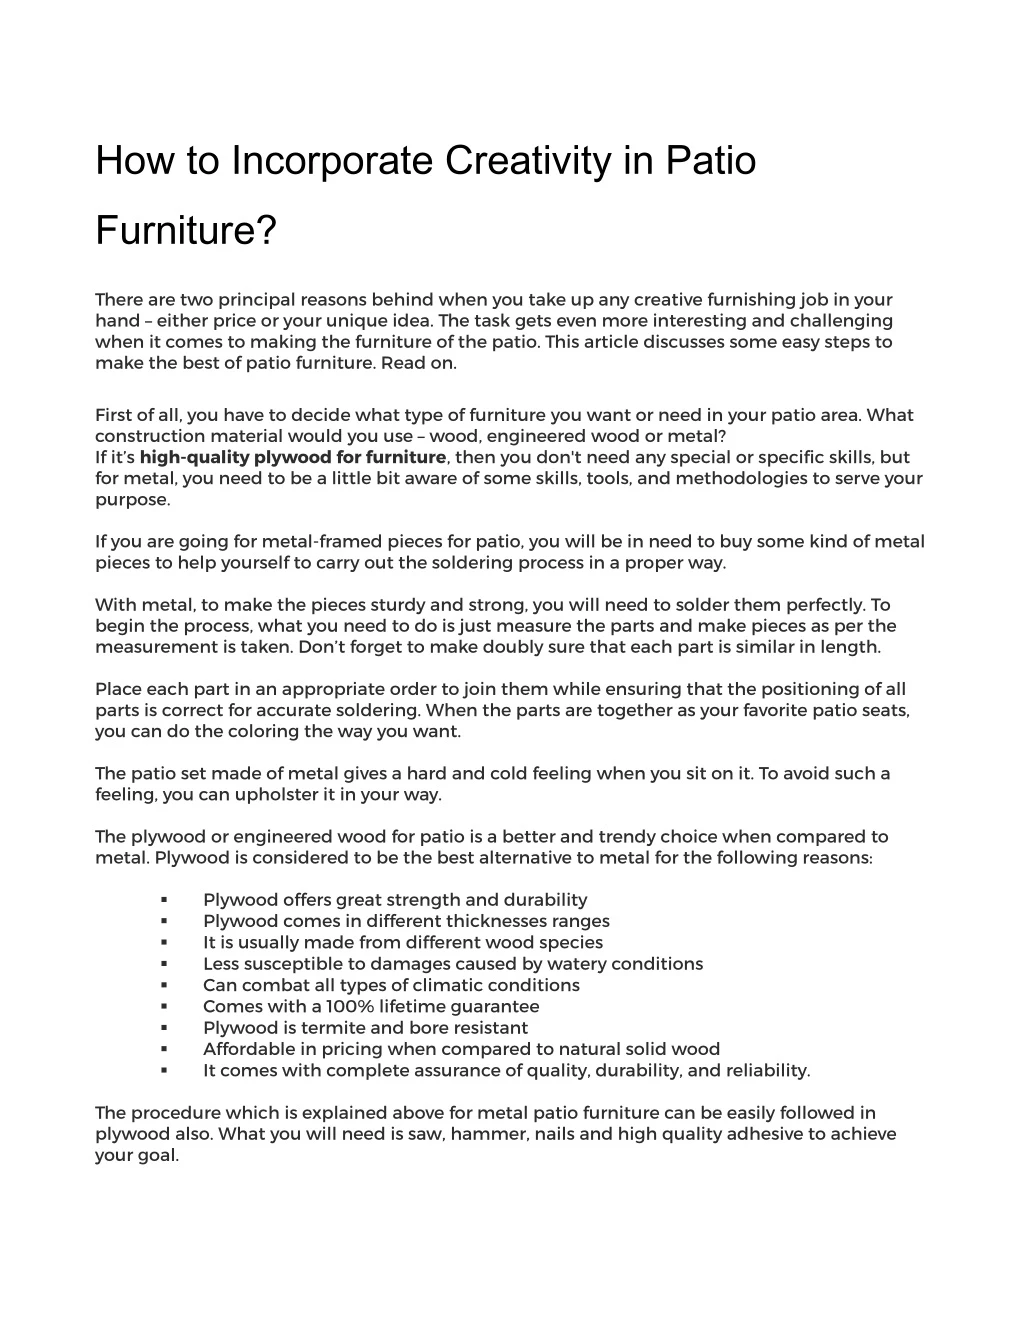 how to incorporate creativity in patio furniture